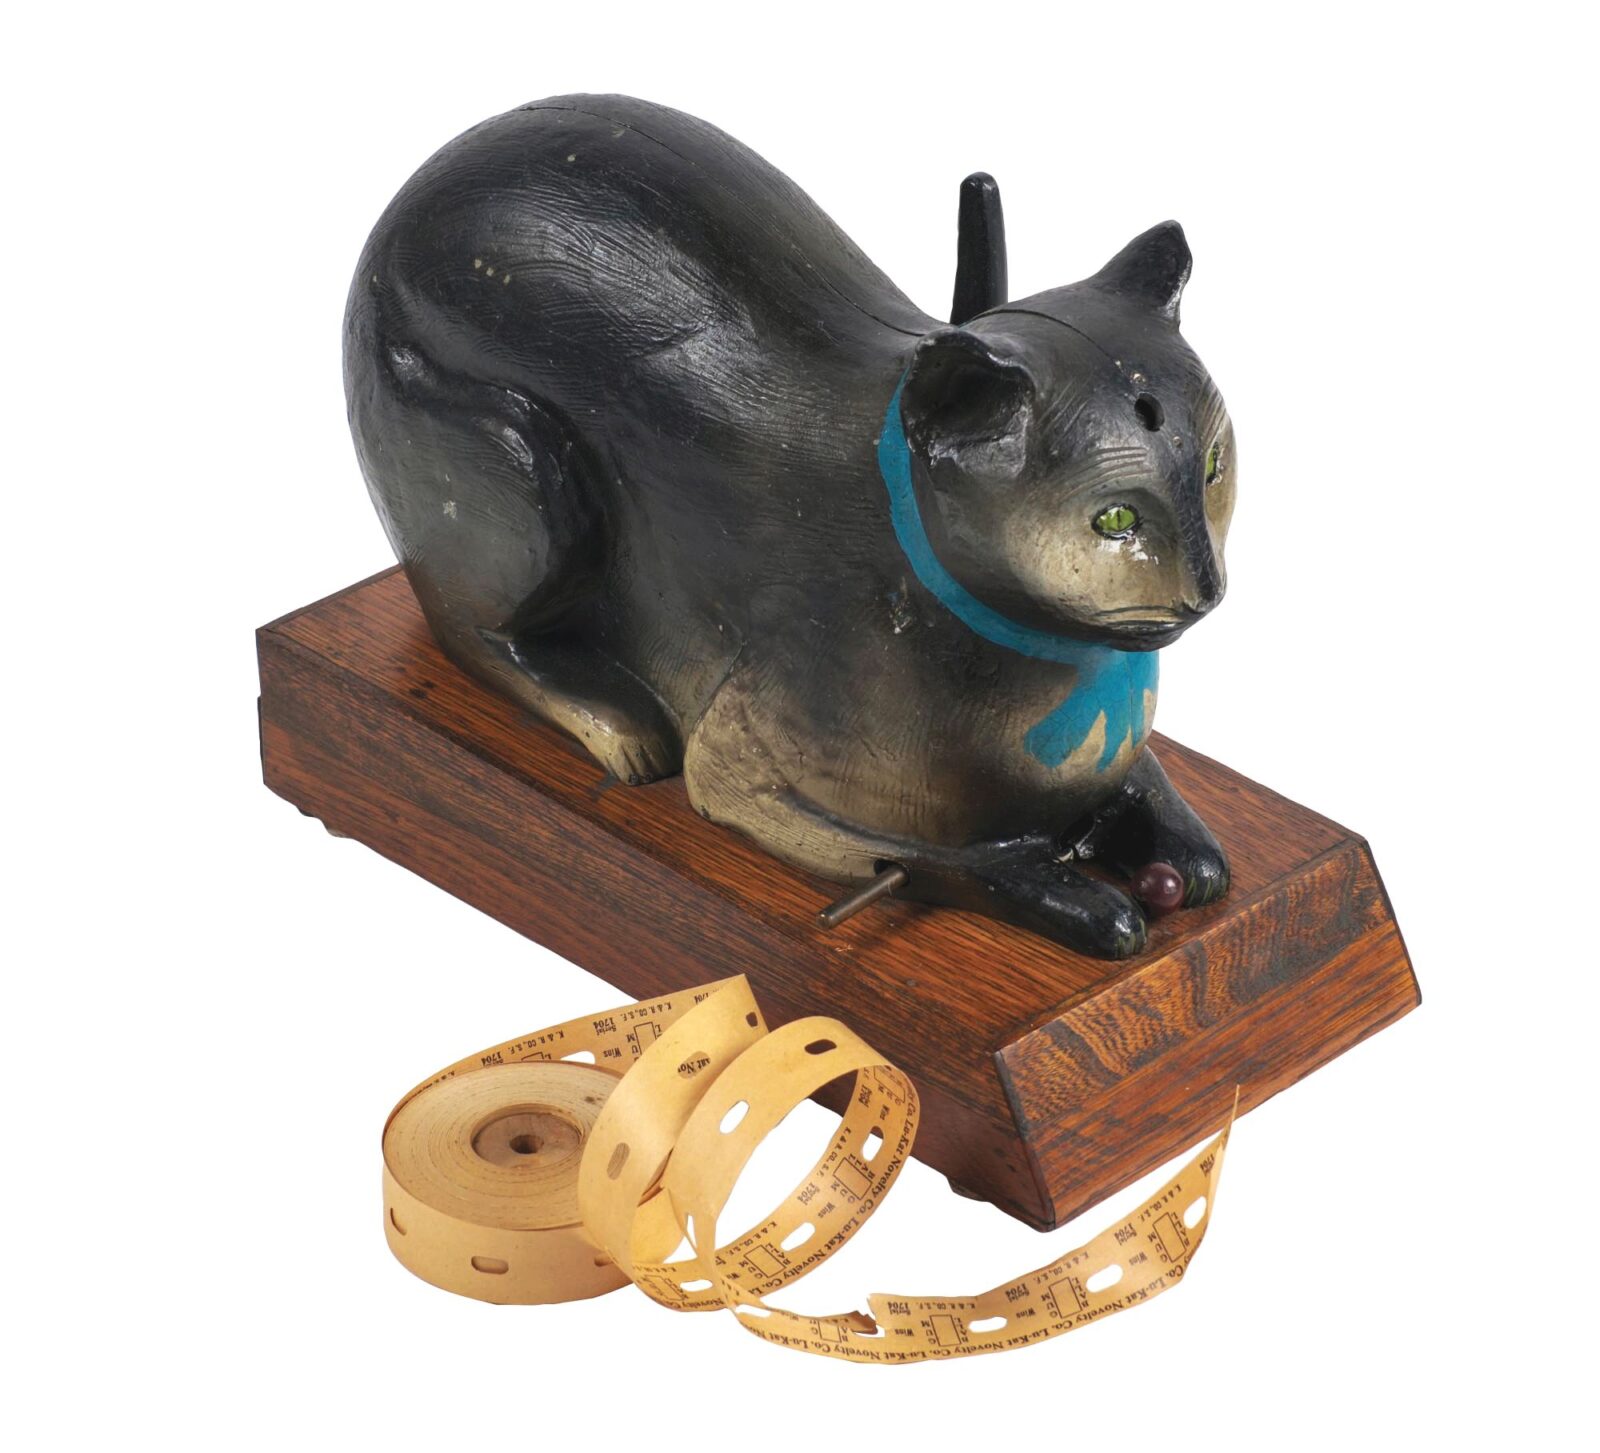 'Lu-Cat' trade stimulator with gumball feature, estimated at $10,000-$20,000 at Morphy.